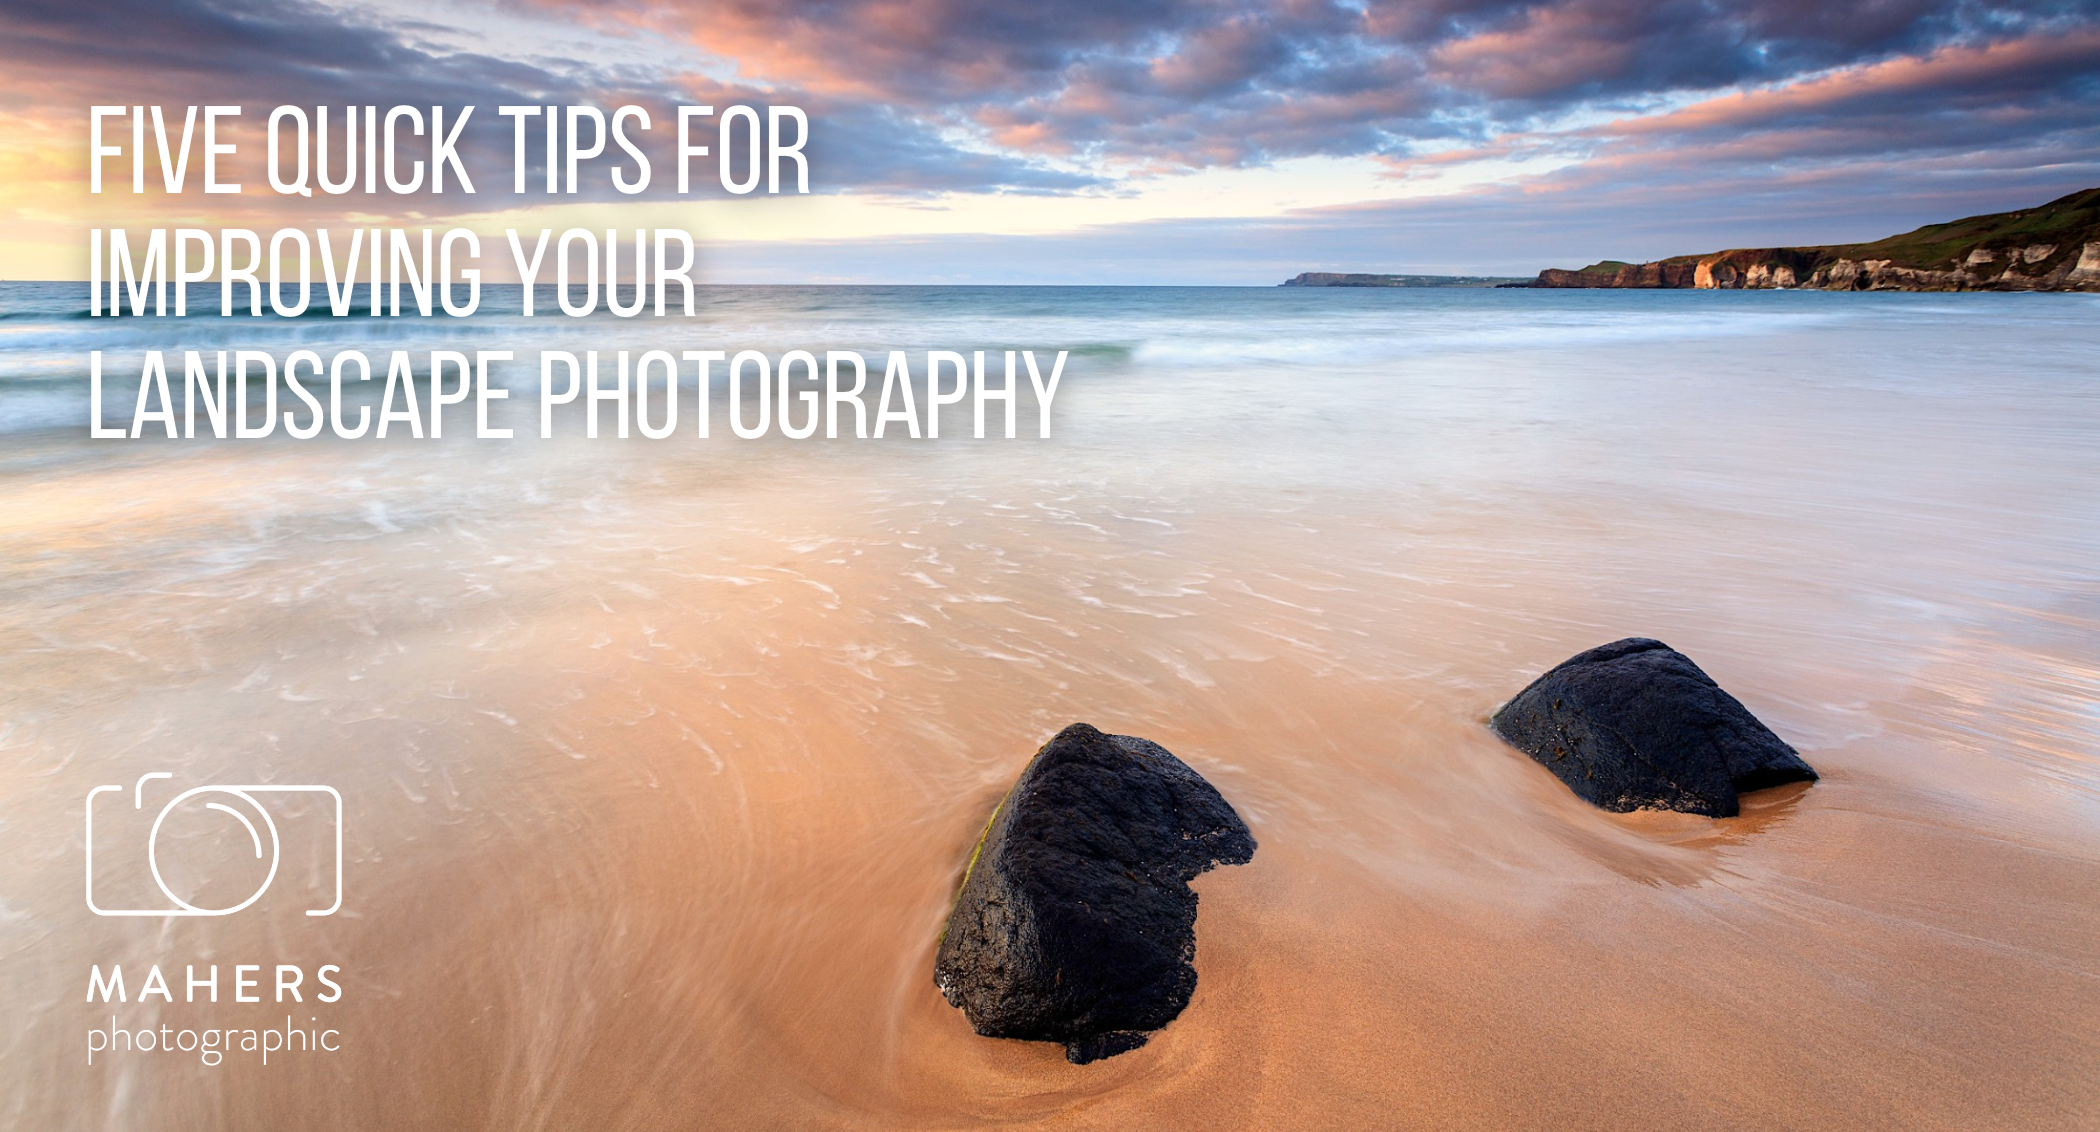 Five quick tips for improving your landscape photography